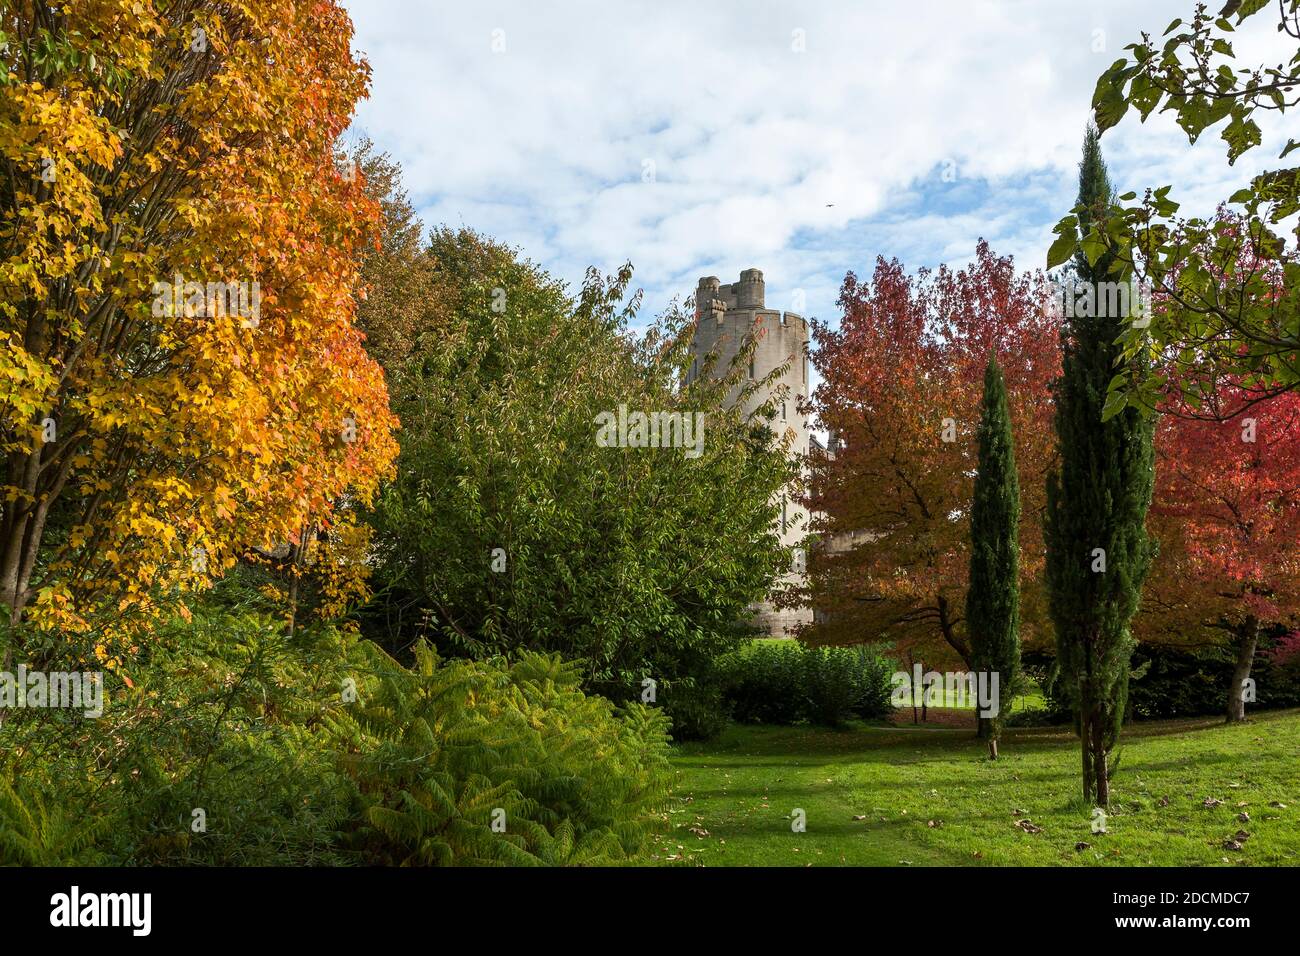 Autumn colour in the Castle gardens, Arundel, West Sussex, England, UK, with glimpse of one of the Arundel Castle towers Stock Photo